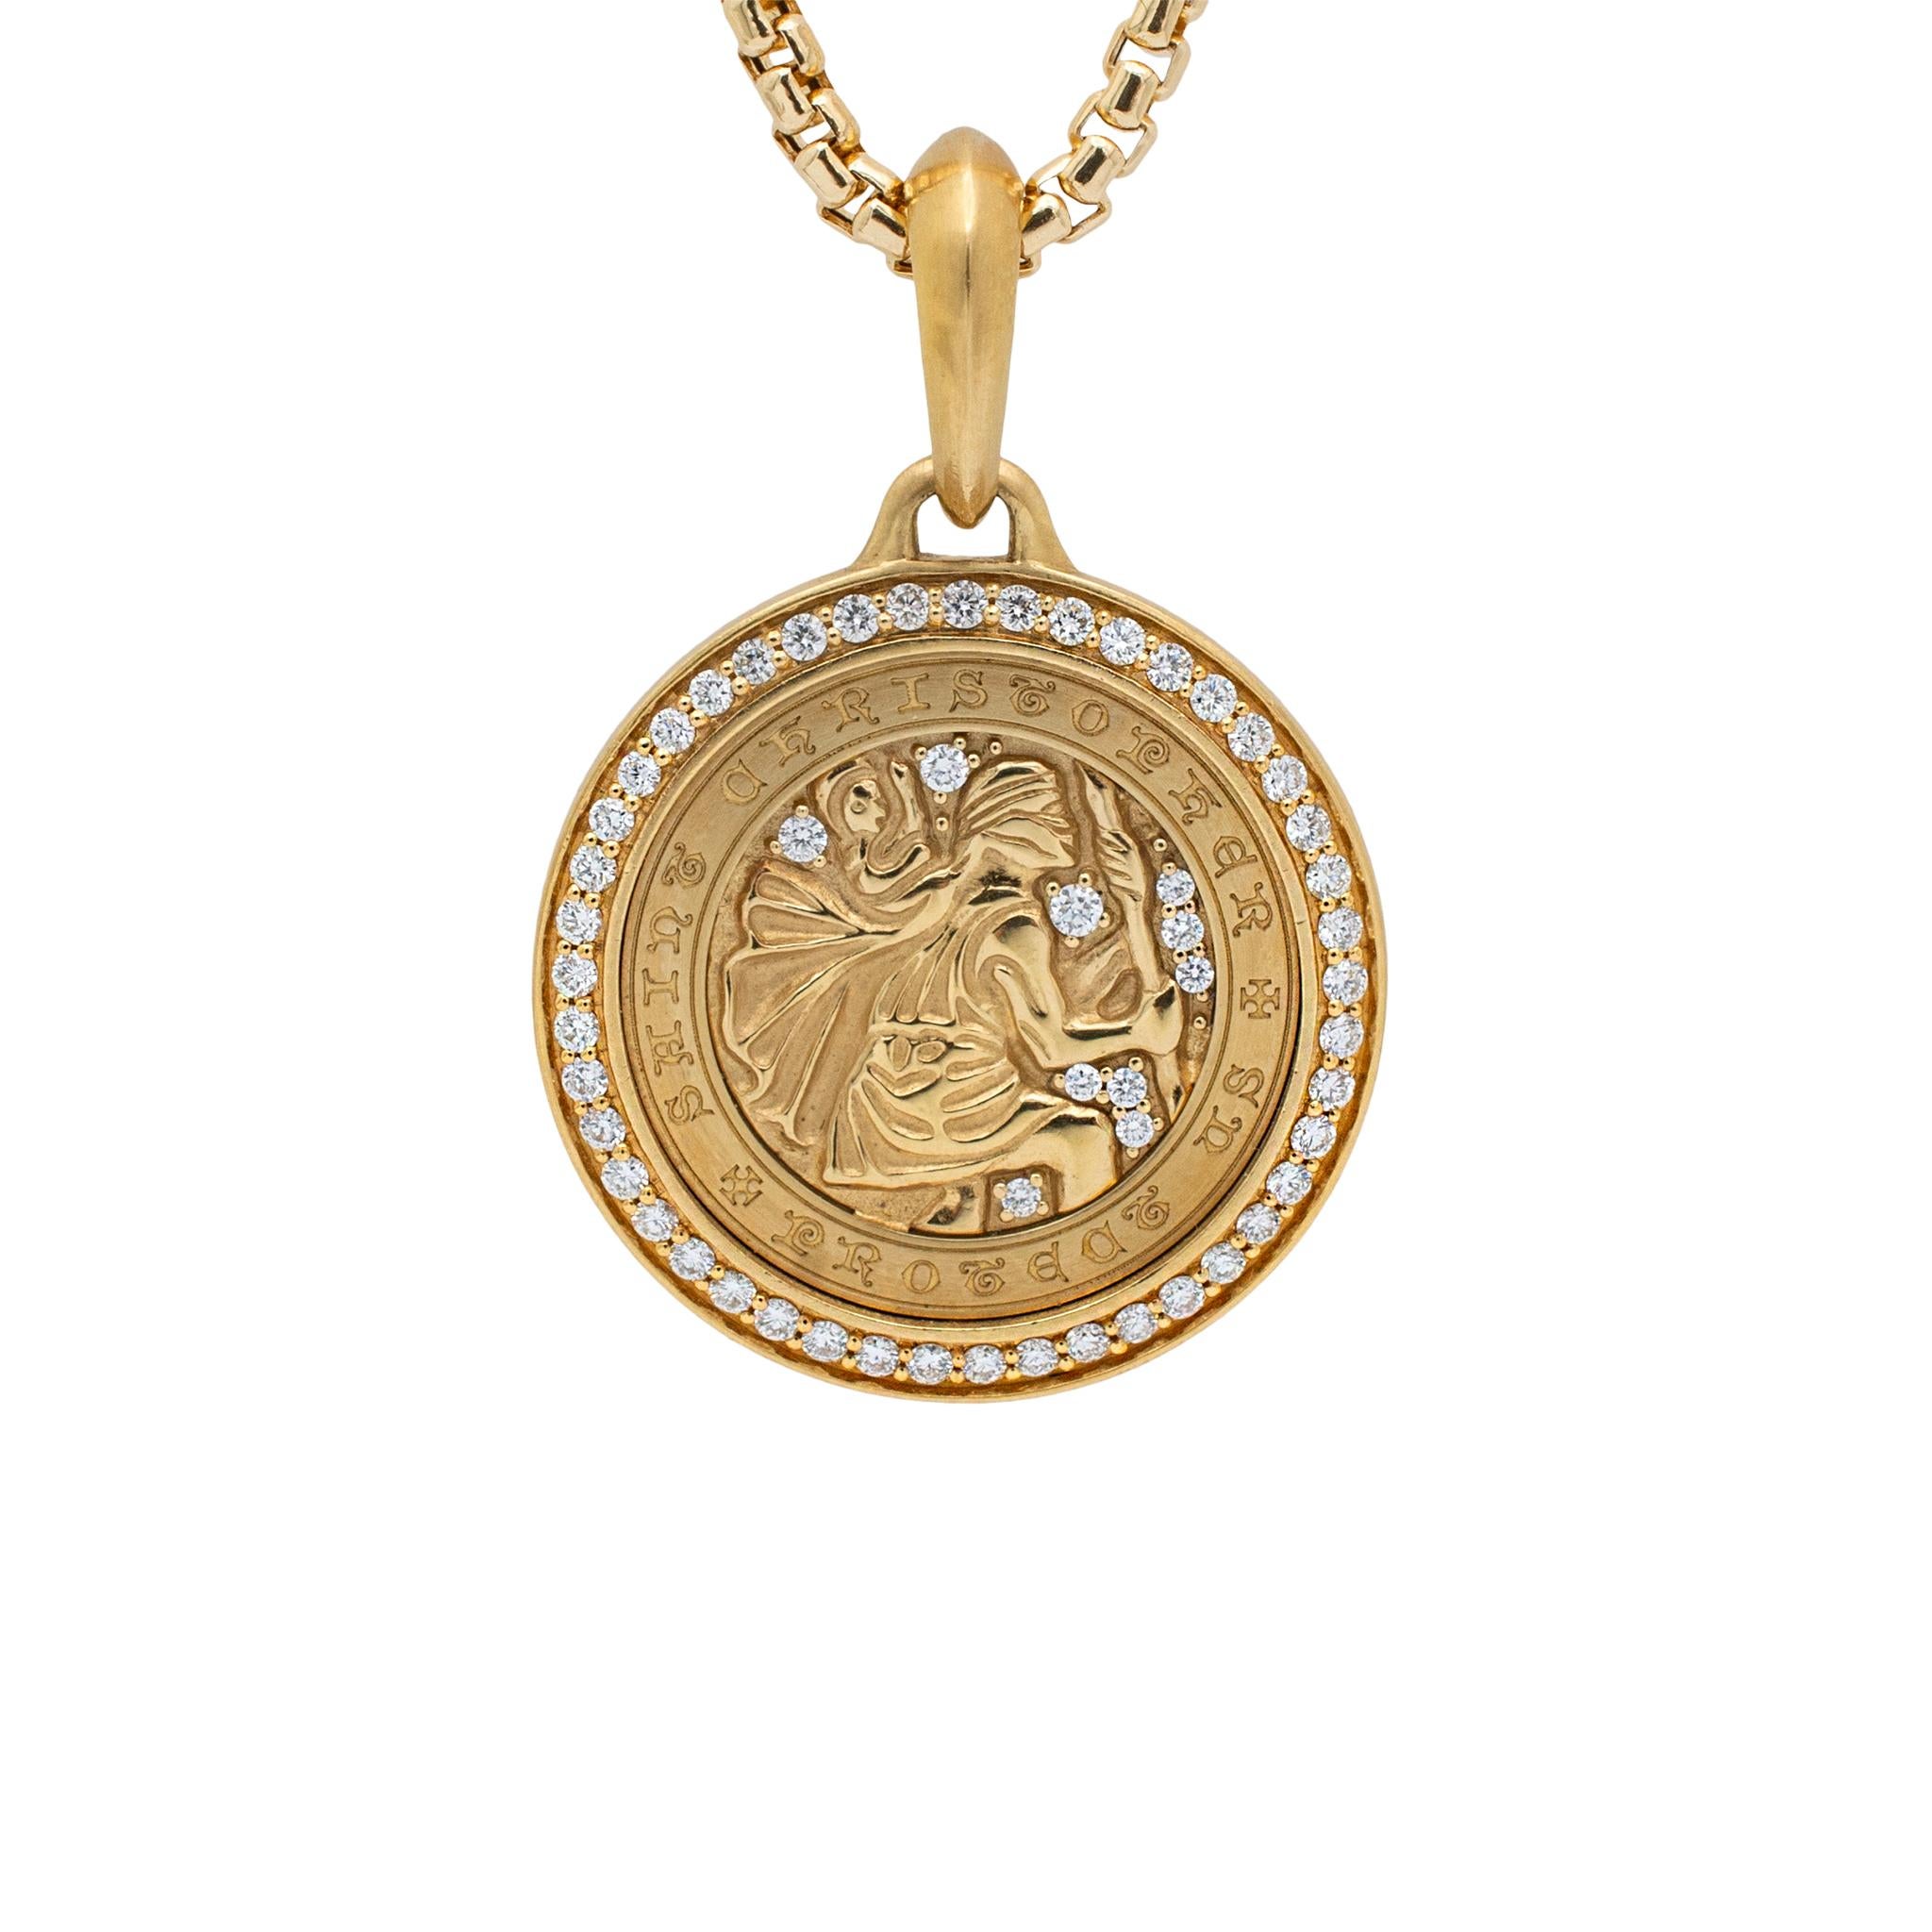 Brand: David Yurman

Metal Type: 18K Yellow Gold

Chain Length: 20 Inches

Pendant Length: 34.50 mm

Total Weight: 26.66 grams

Expertly crafted by David Yurman, this St. Christopher Amulet Diamond Pendant Necklace is a stunning addition to any